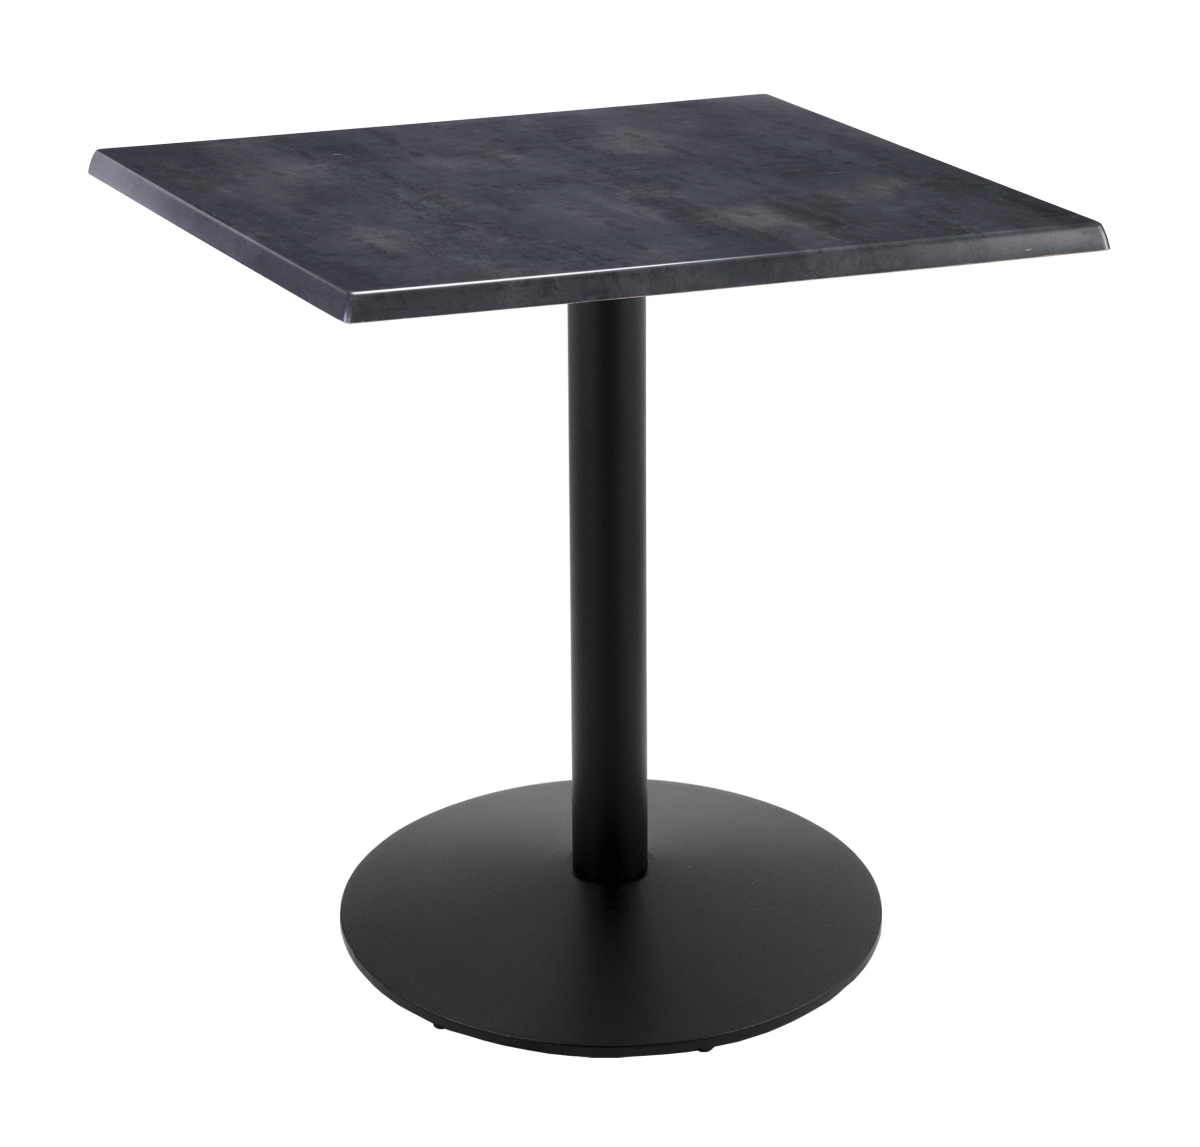 Picture of Holland Bar Stool OD214-2236BWOD30SQBlkStl 36 in. Black Table with 30 x 30 in. Diameter Indoor & Outdoor Black Steel Square Top